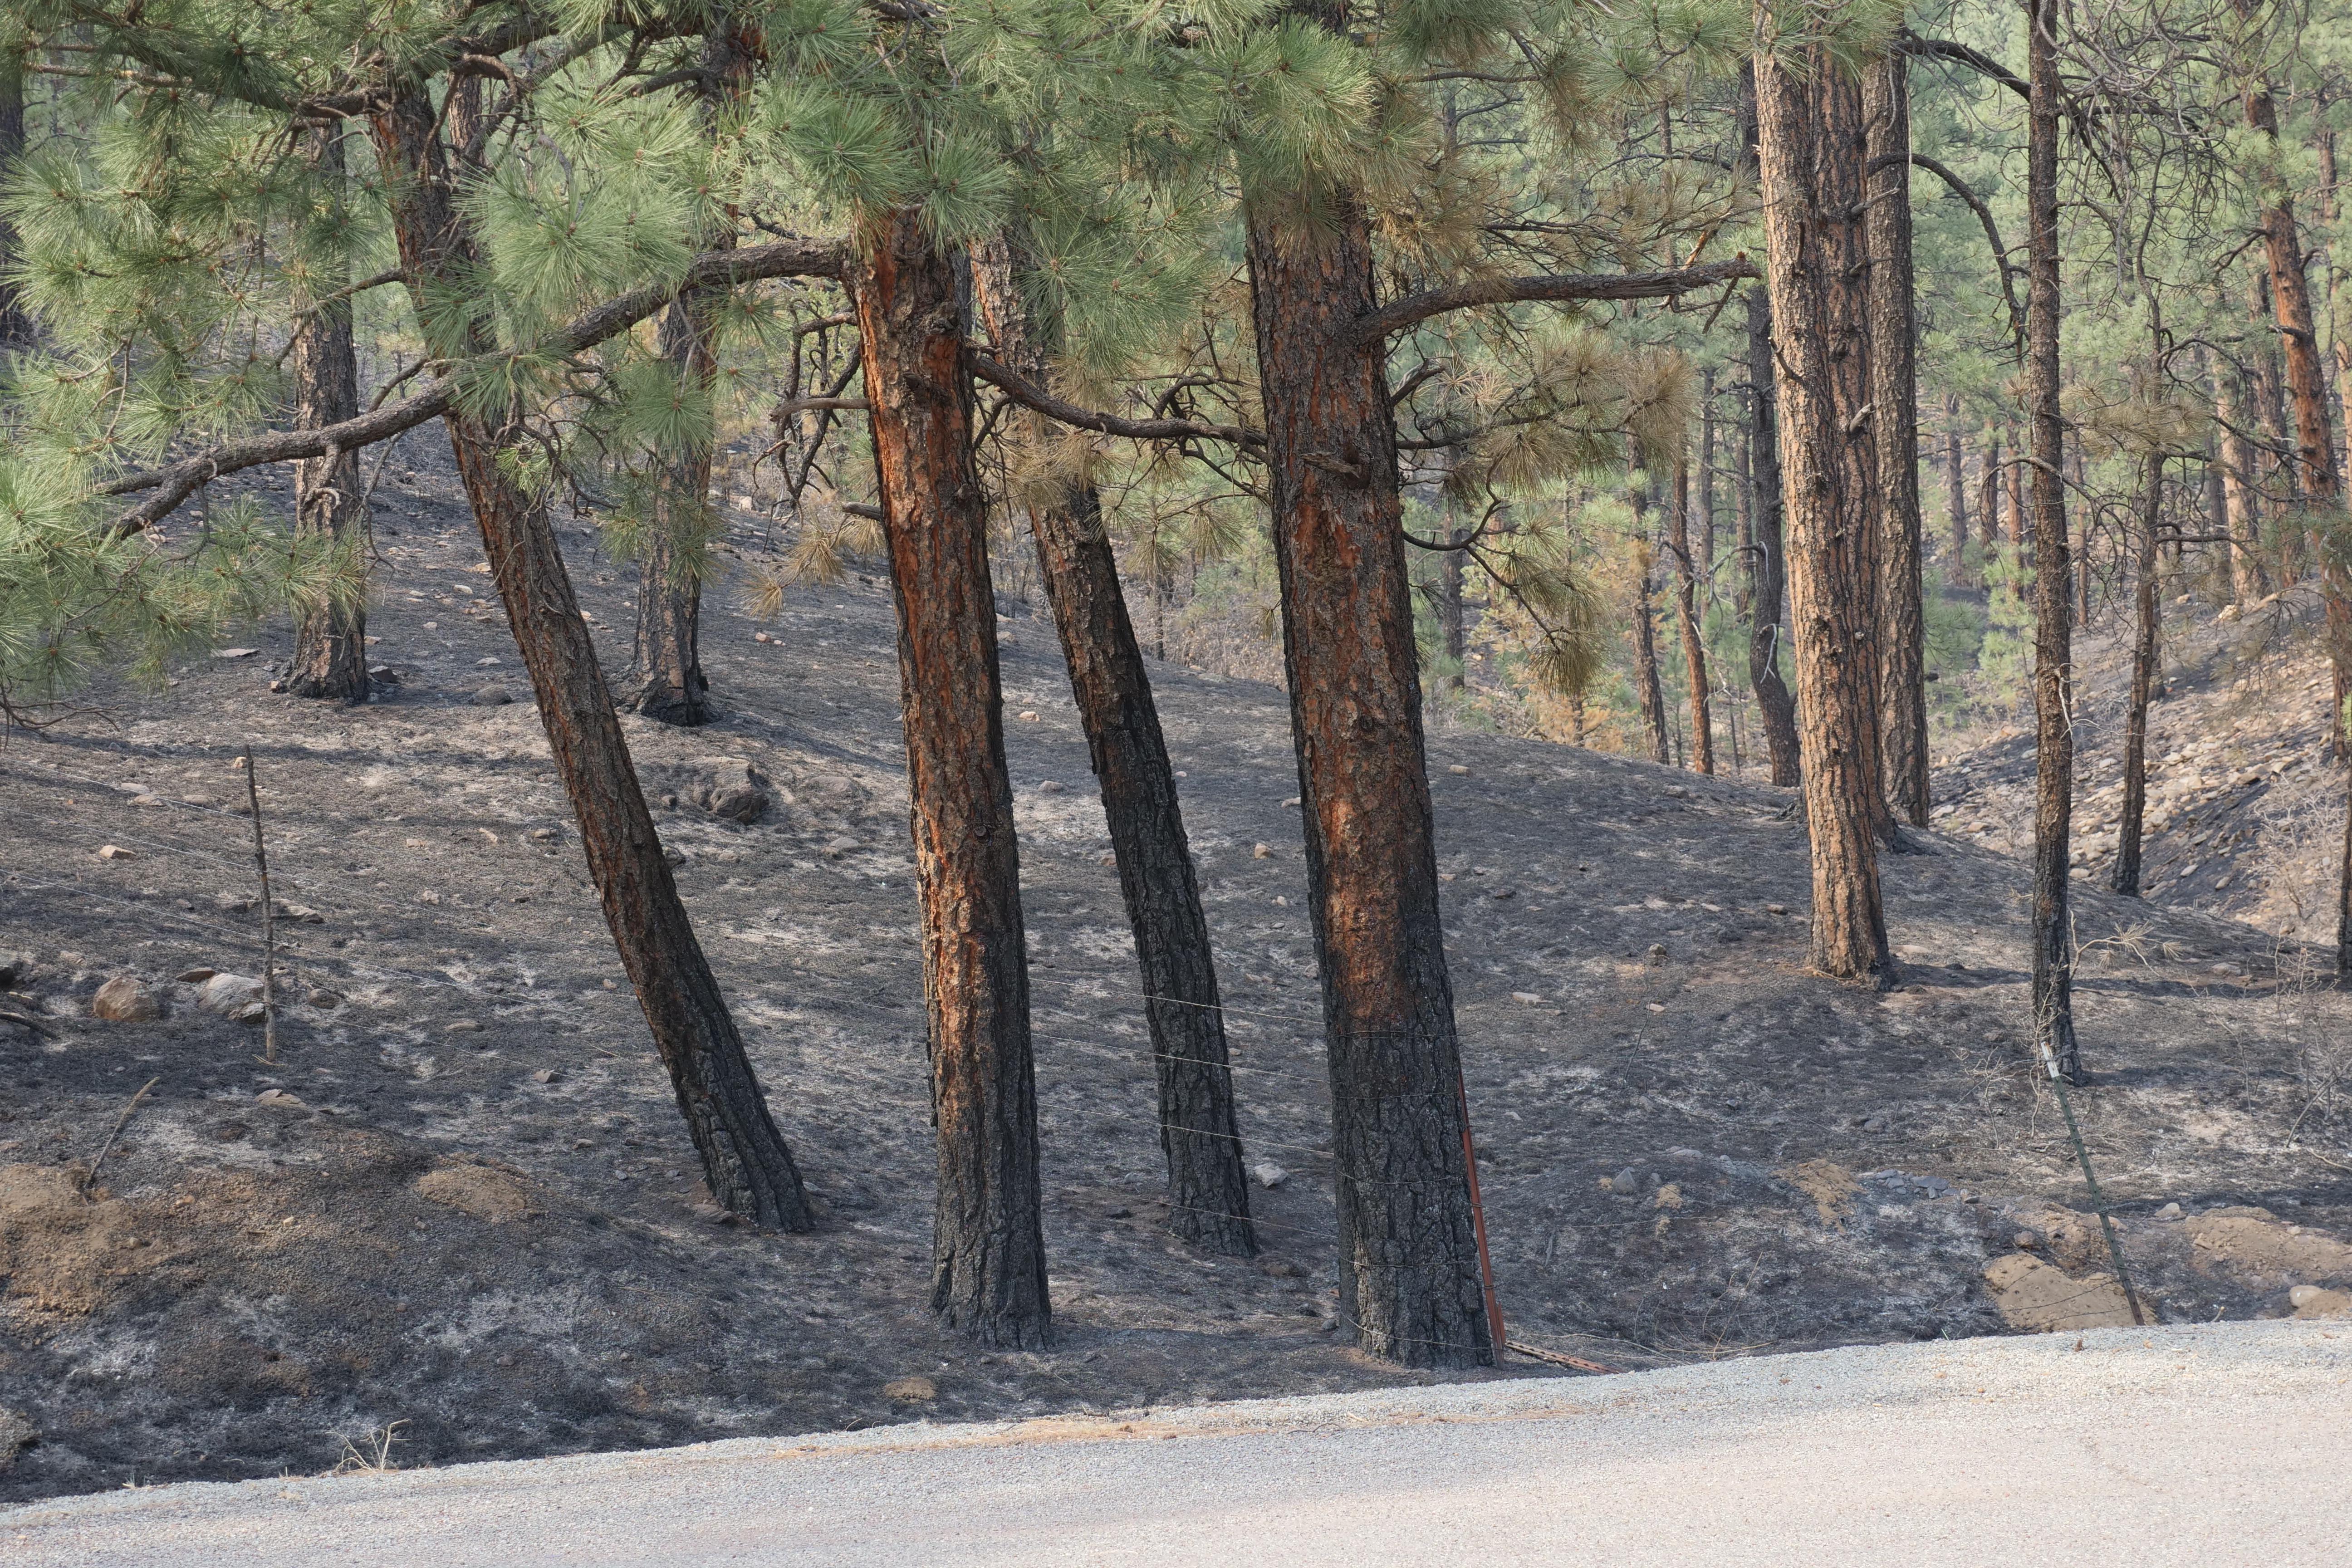 Ponderosa pines can survive after being scorched by low-intensity fire